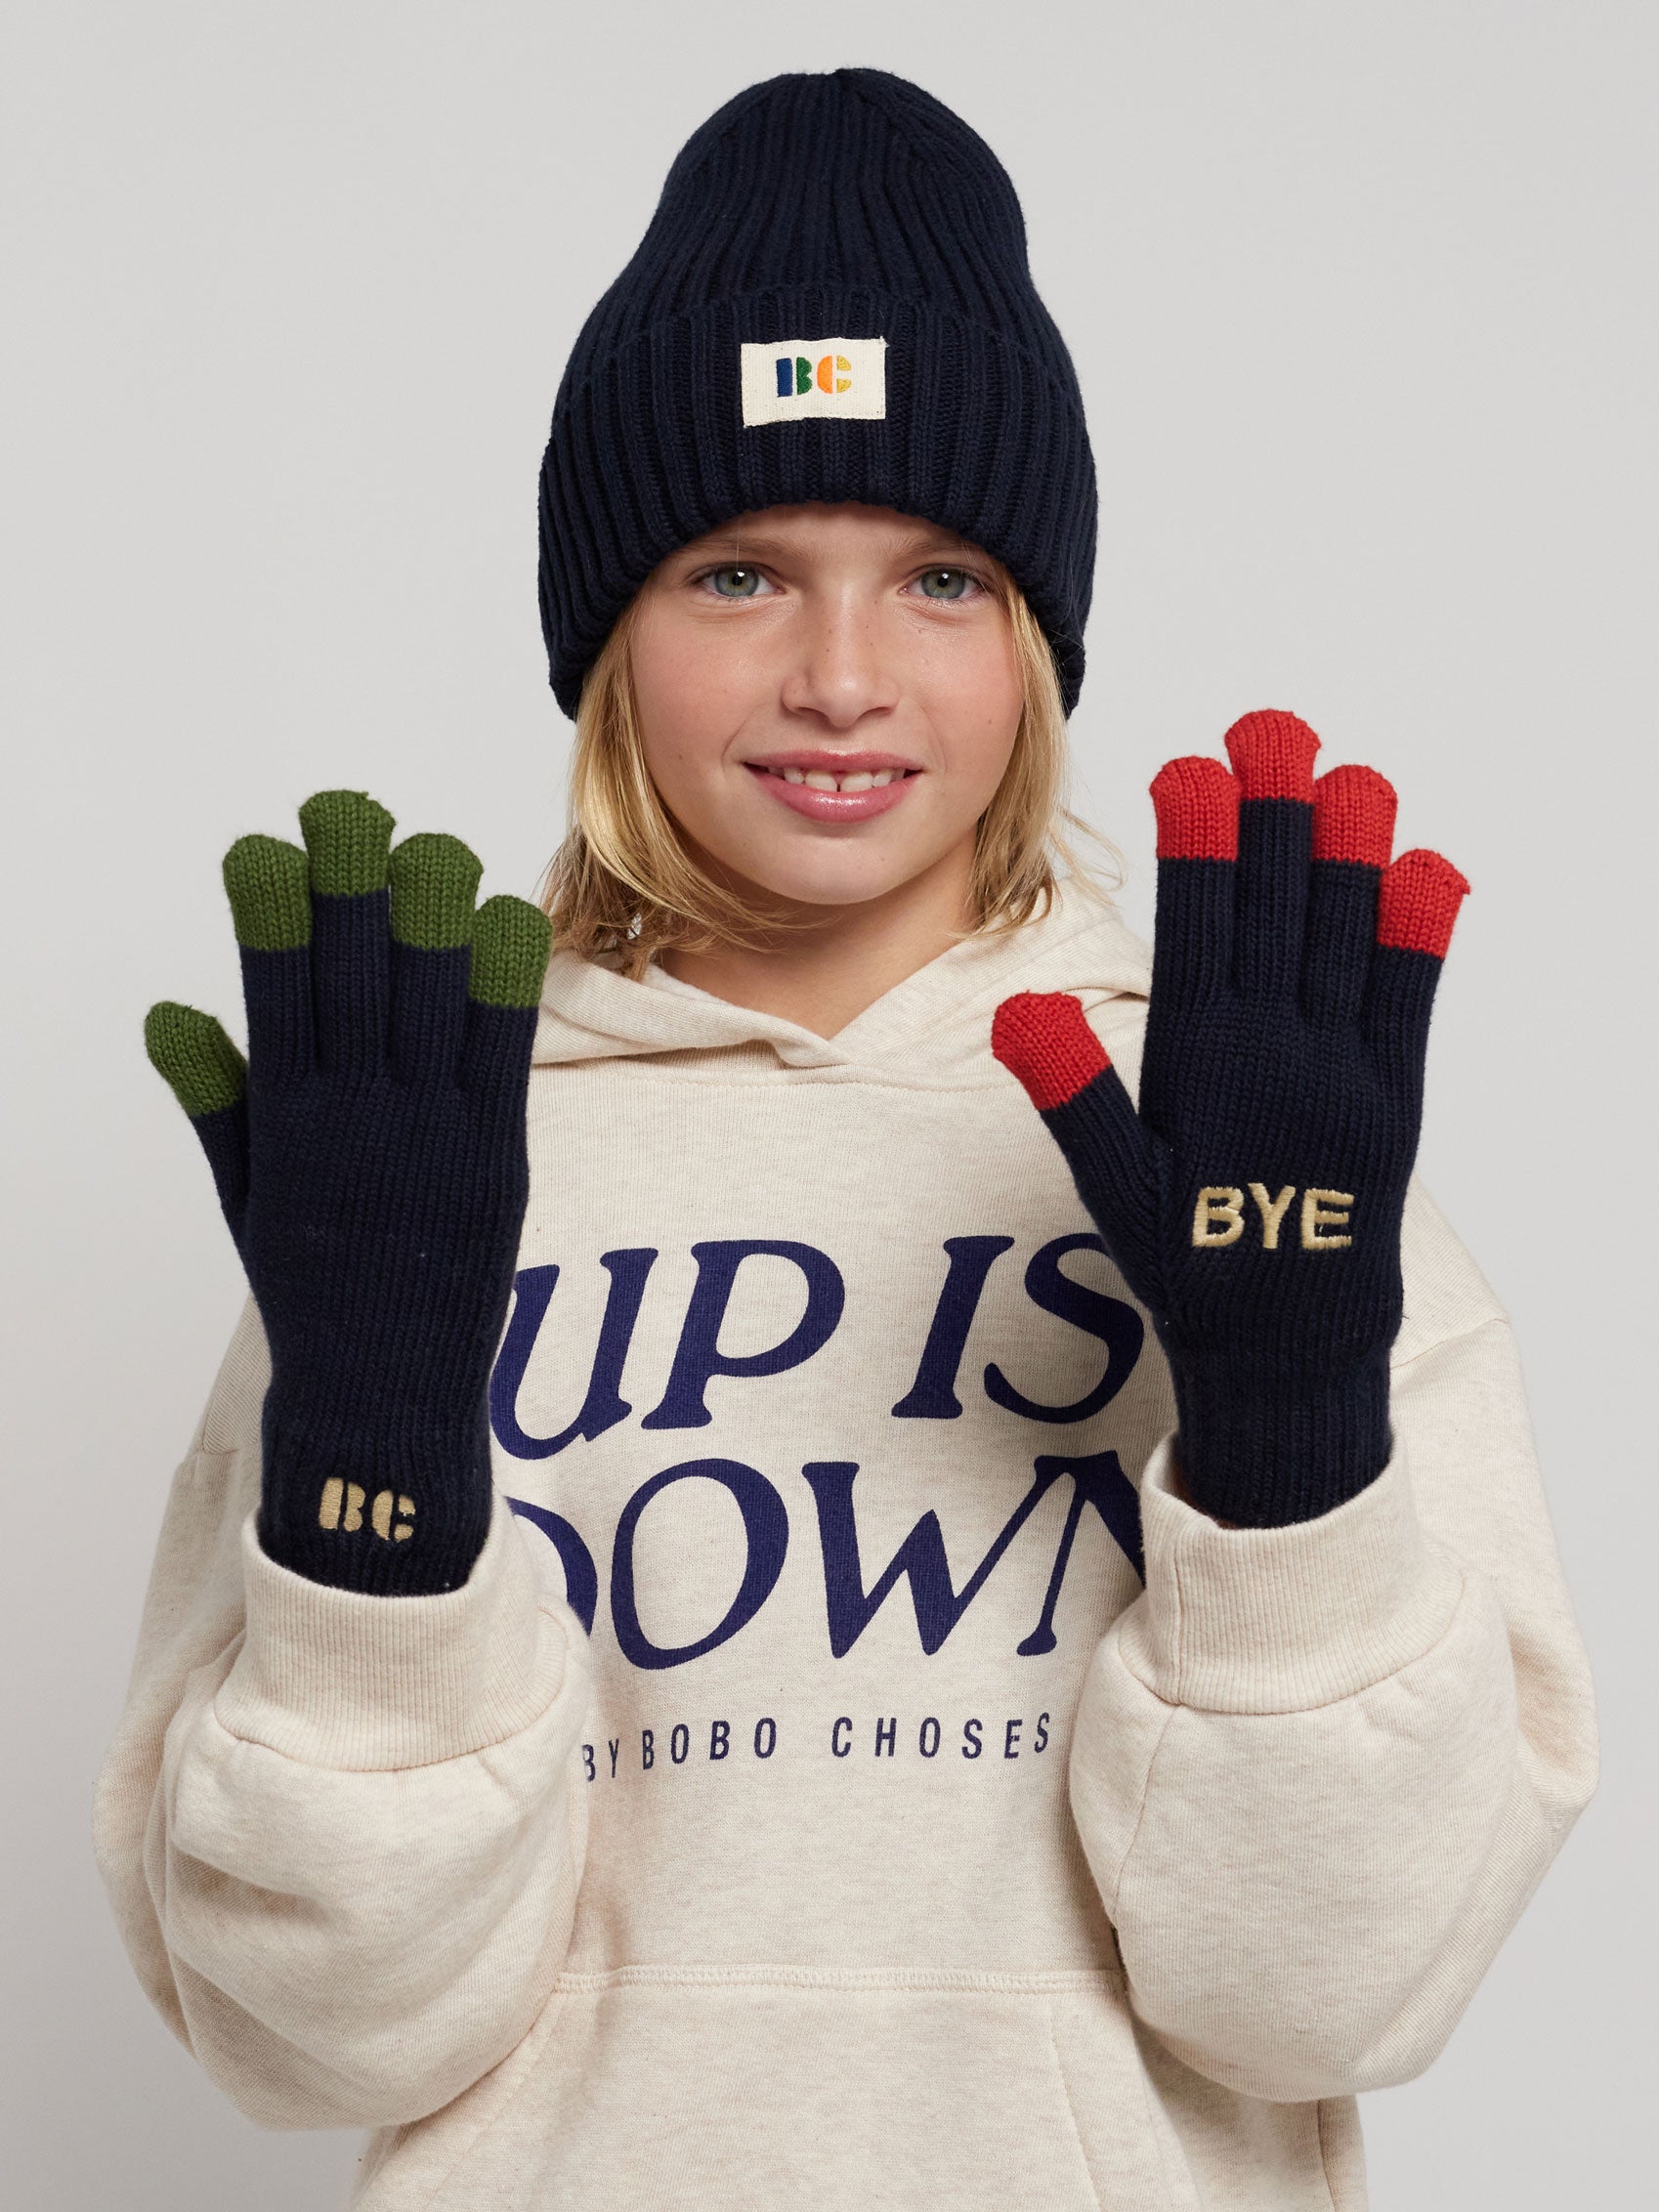 Colored knitted – Bobo Fingers gloves Choses BC